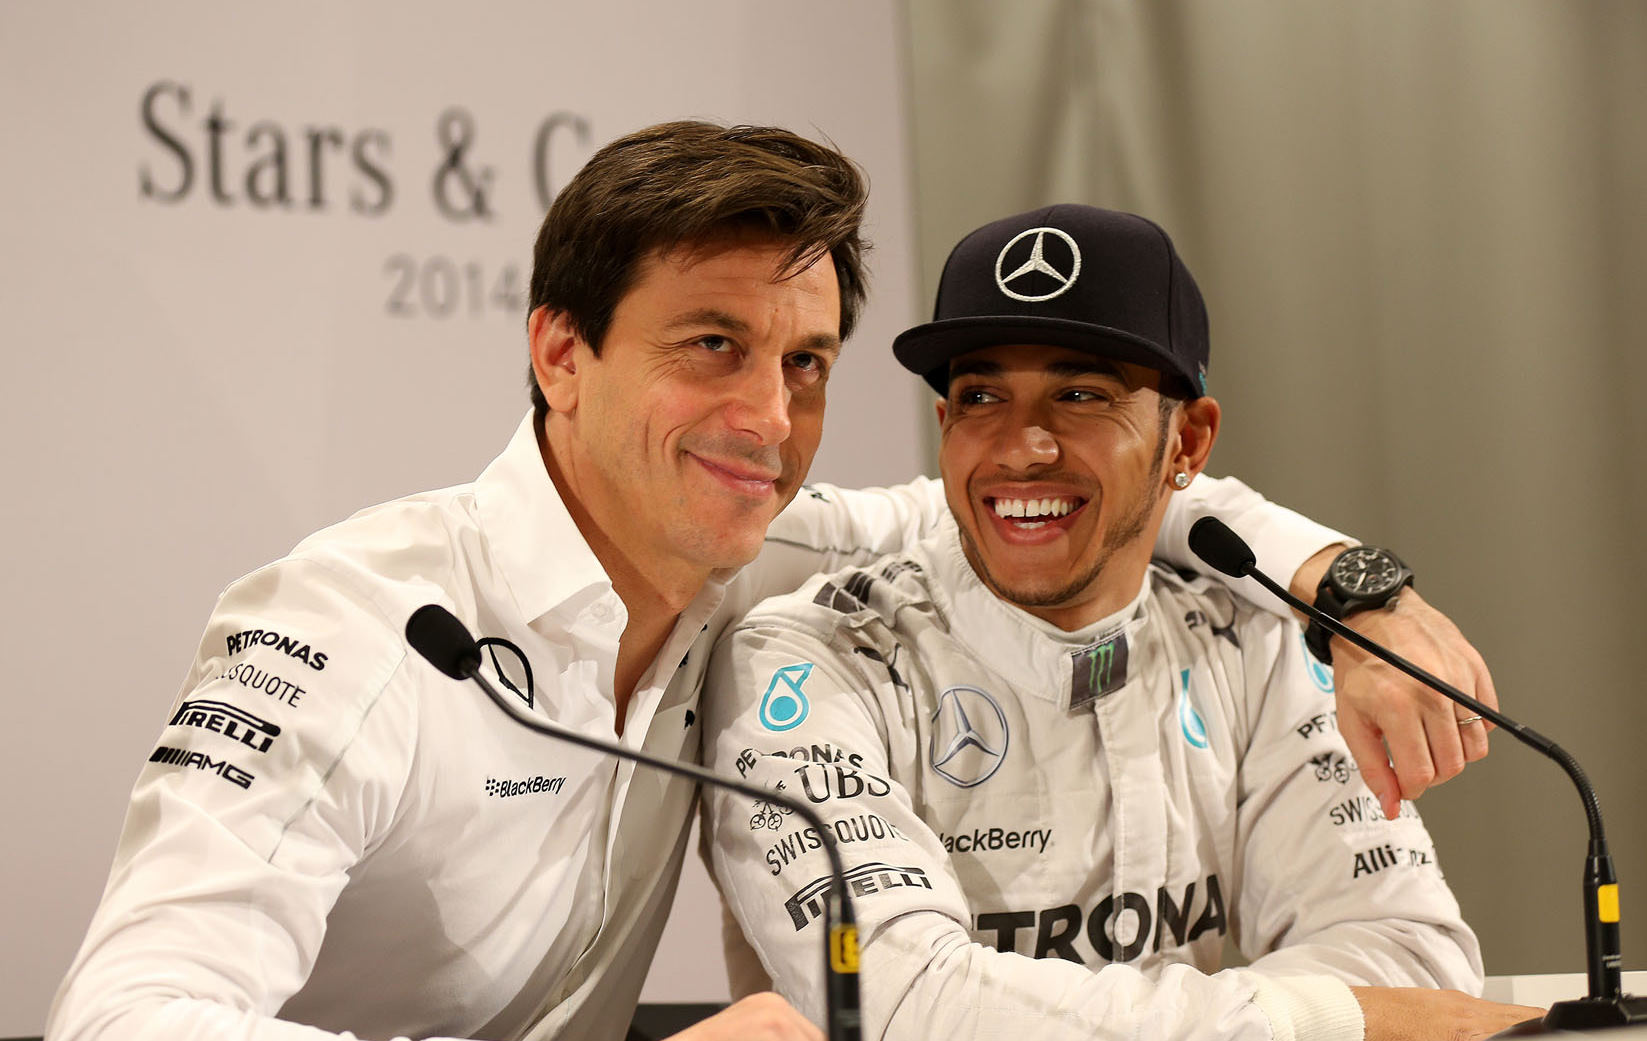 Wolff to Hamilton, haha that's funny, you want how much?